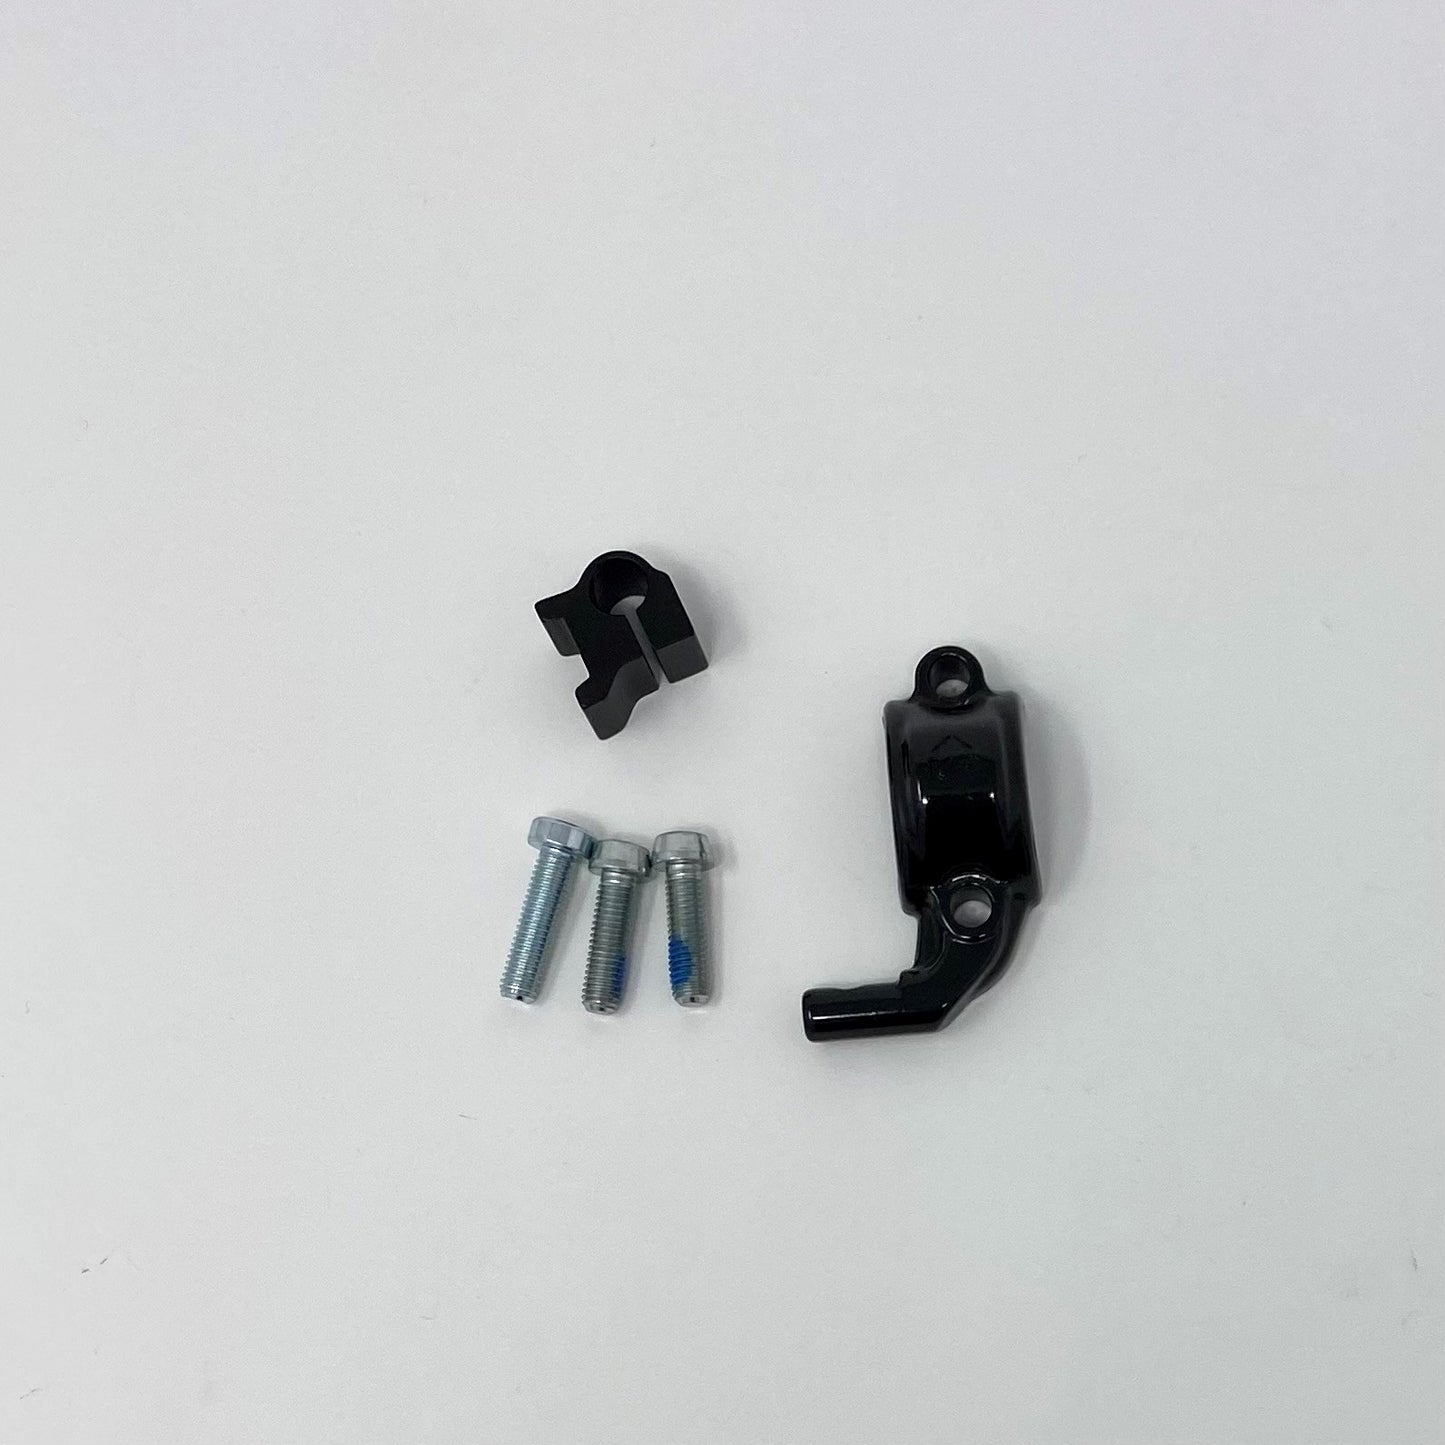 Sram Mixmaster Clamp Left Glossy Black clamp and screws - FD40236-20